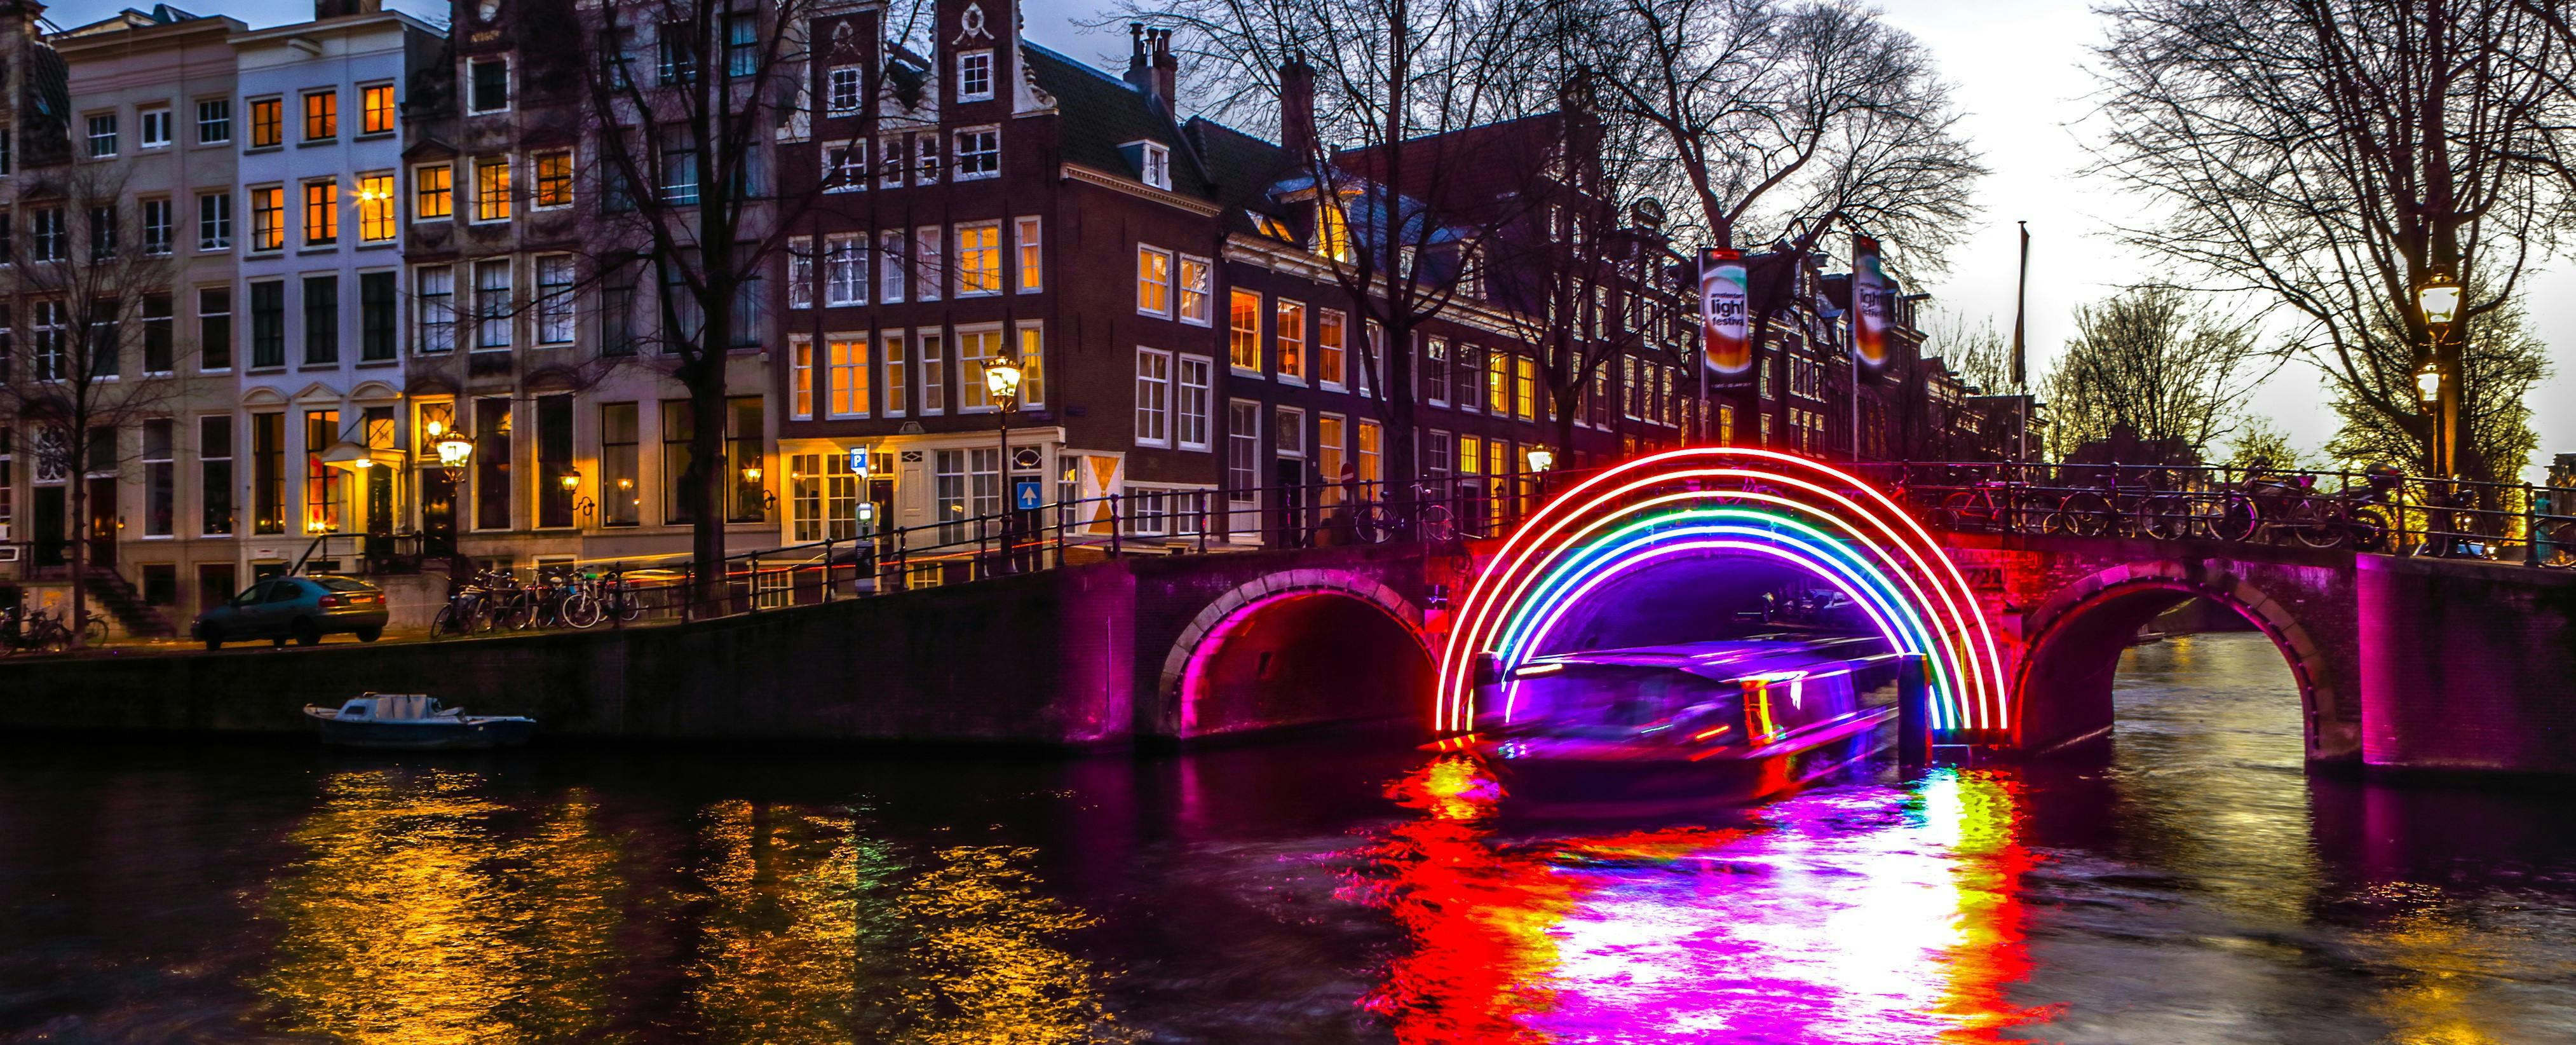 Amsterdam Light Festival Tickets and Tours in Amsterdam |